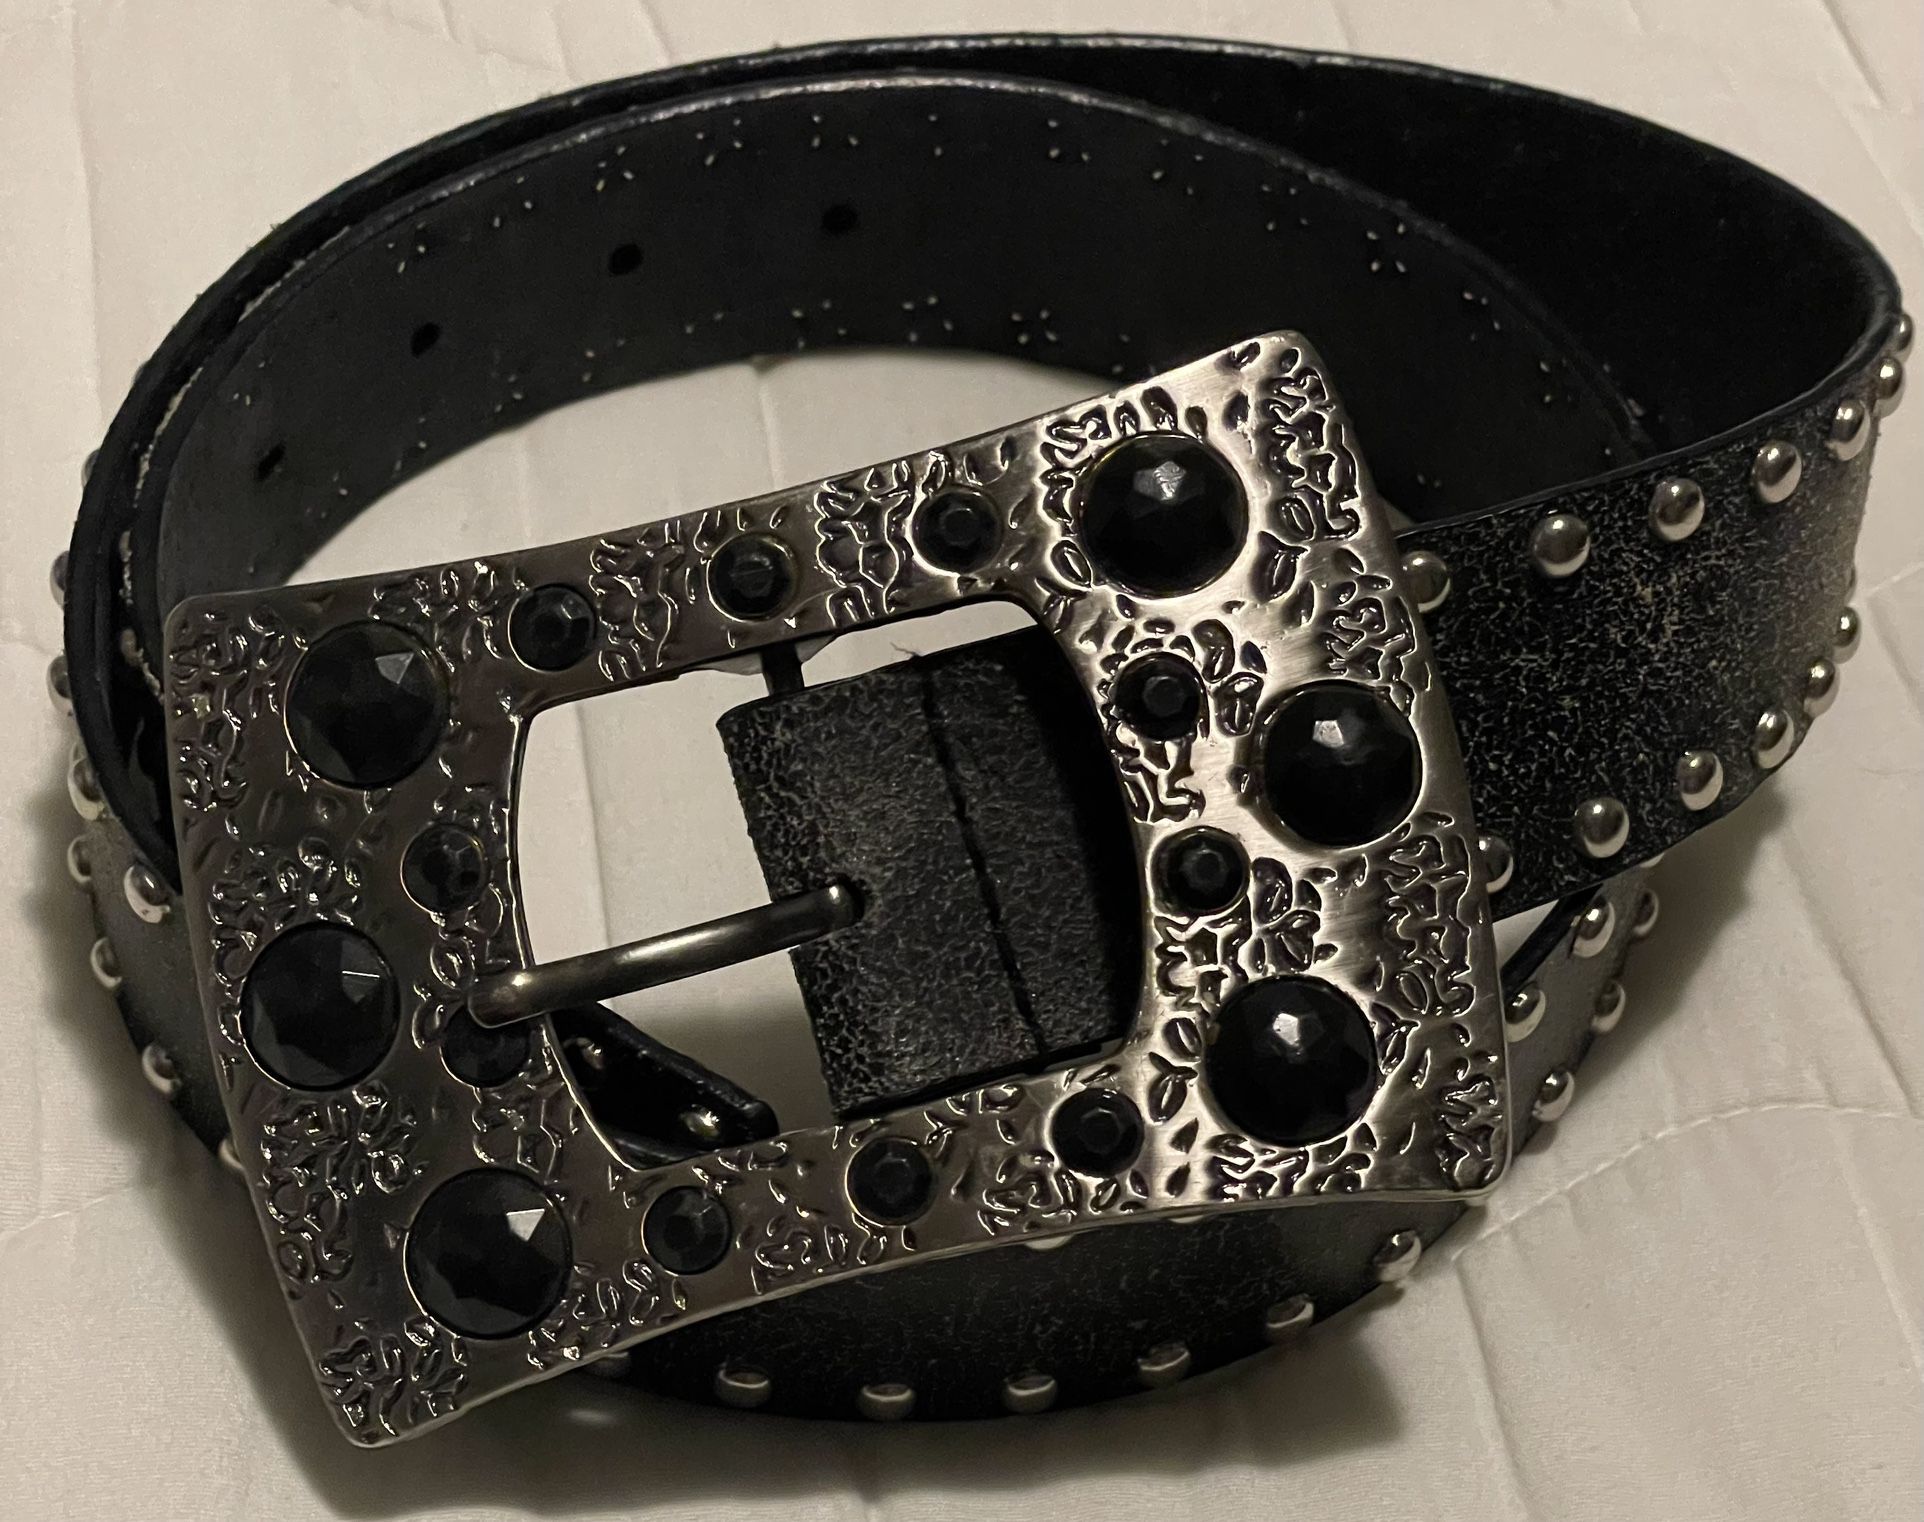 Women’s Distressed Belt Buckle brand! Size Small Or 2